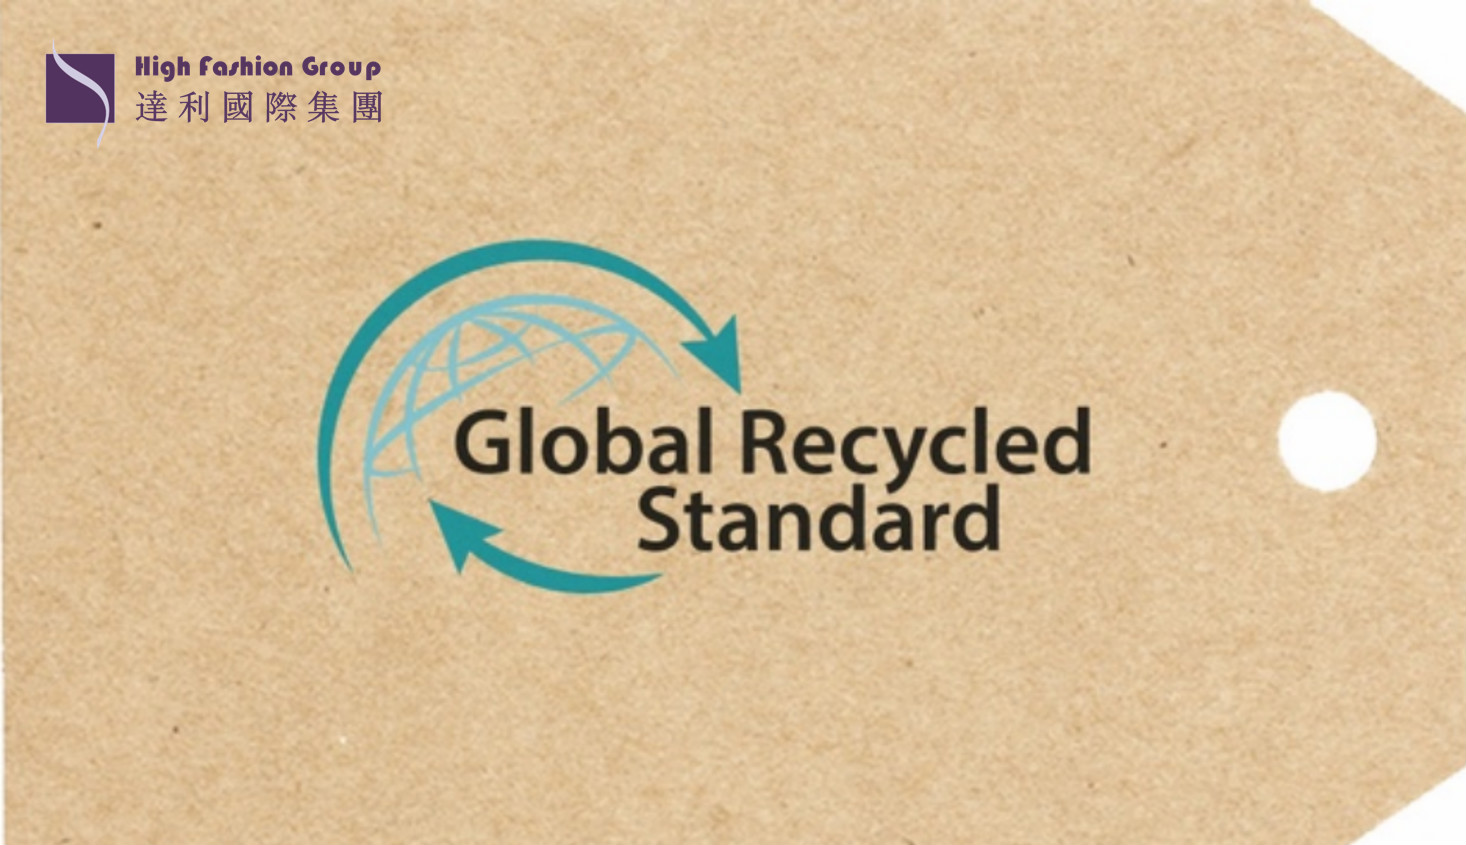 High Fashion (China) Awarded Global Recycle Standard (GRS) Certificate – Green and Sustainable Development, Pioneering Innovation